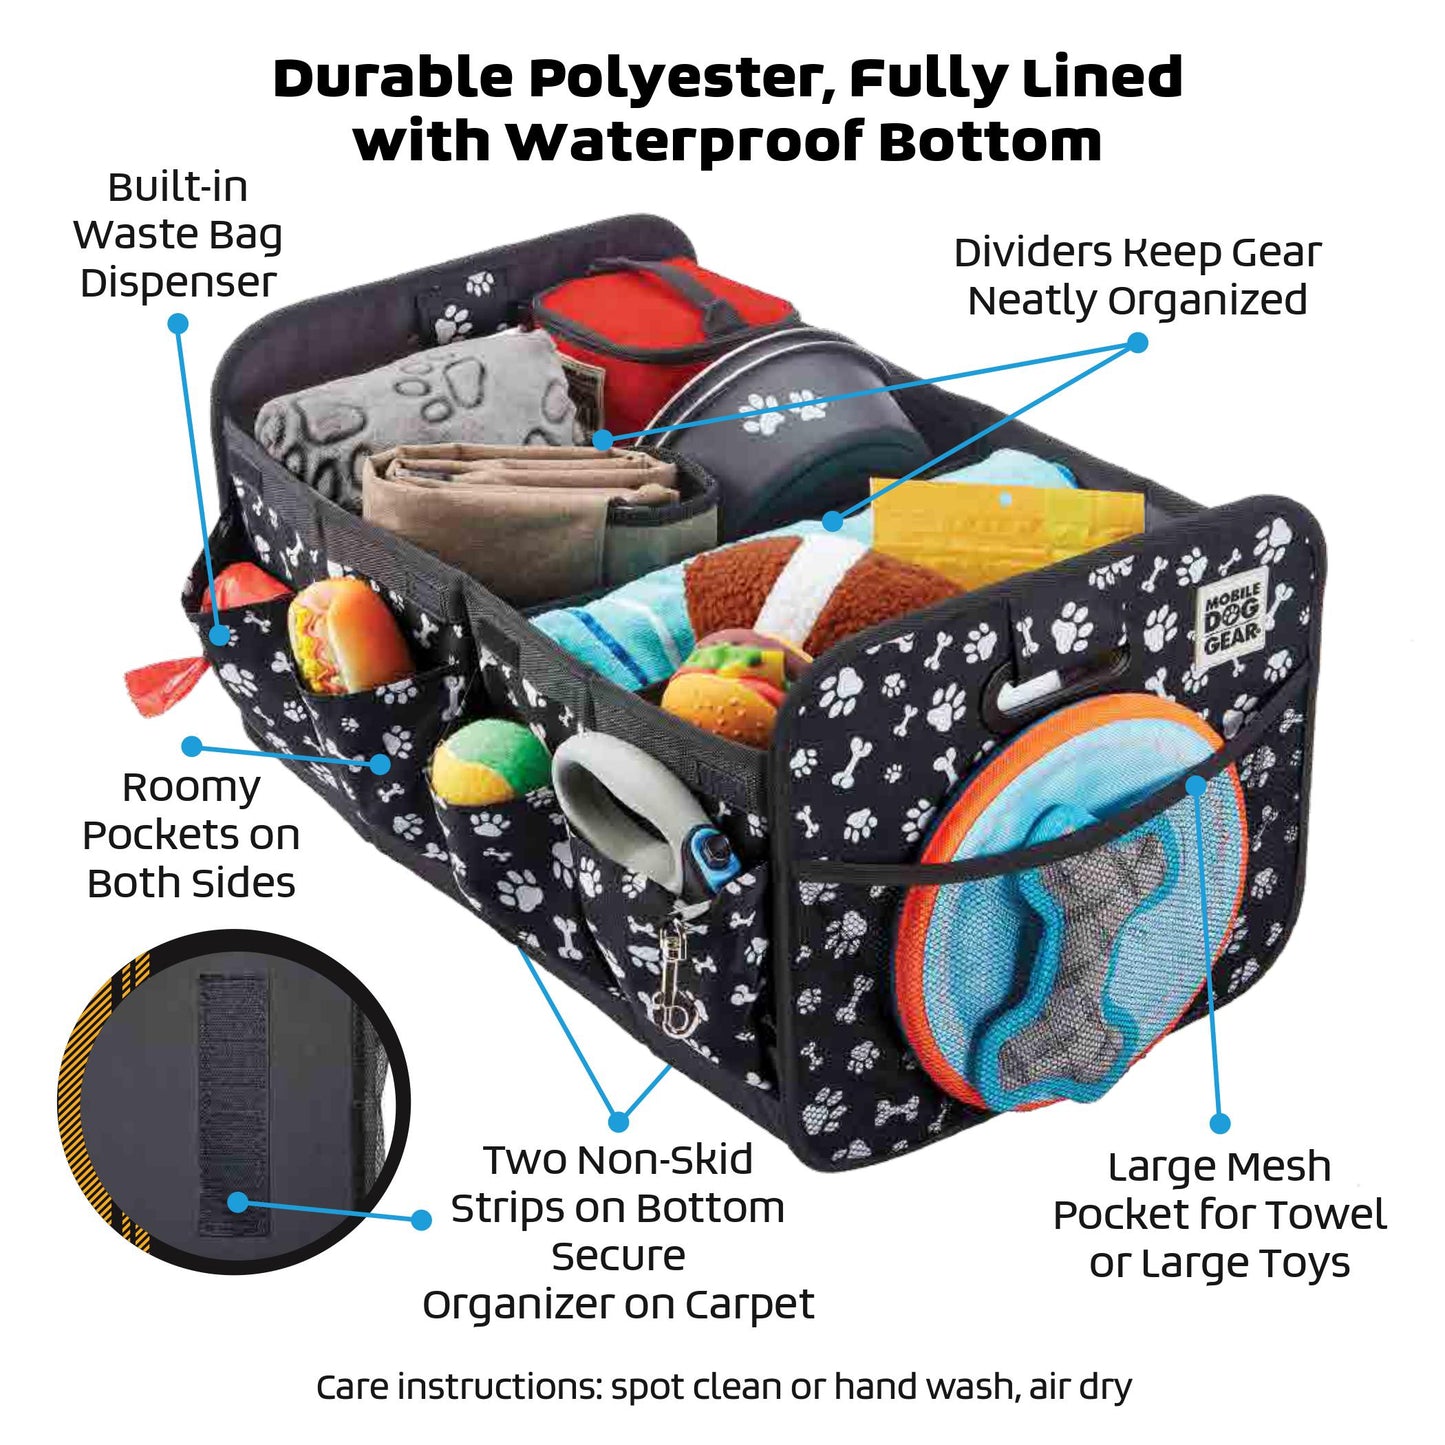 Dogssentials Collapsible Storage Organizer With Built-In Waste Bag Dispenser & 1 Bag Roll